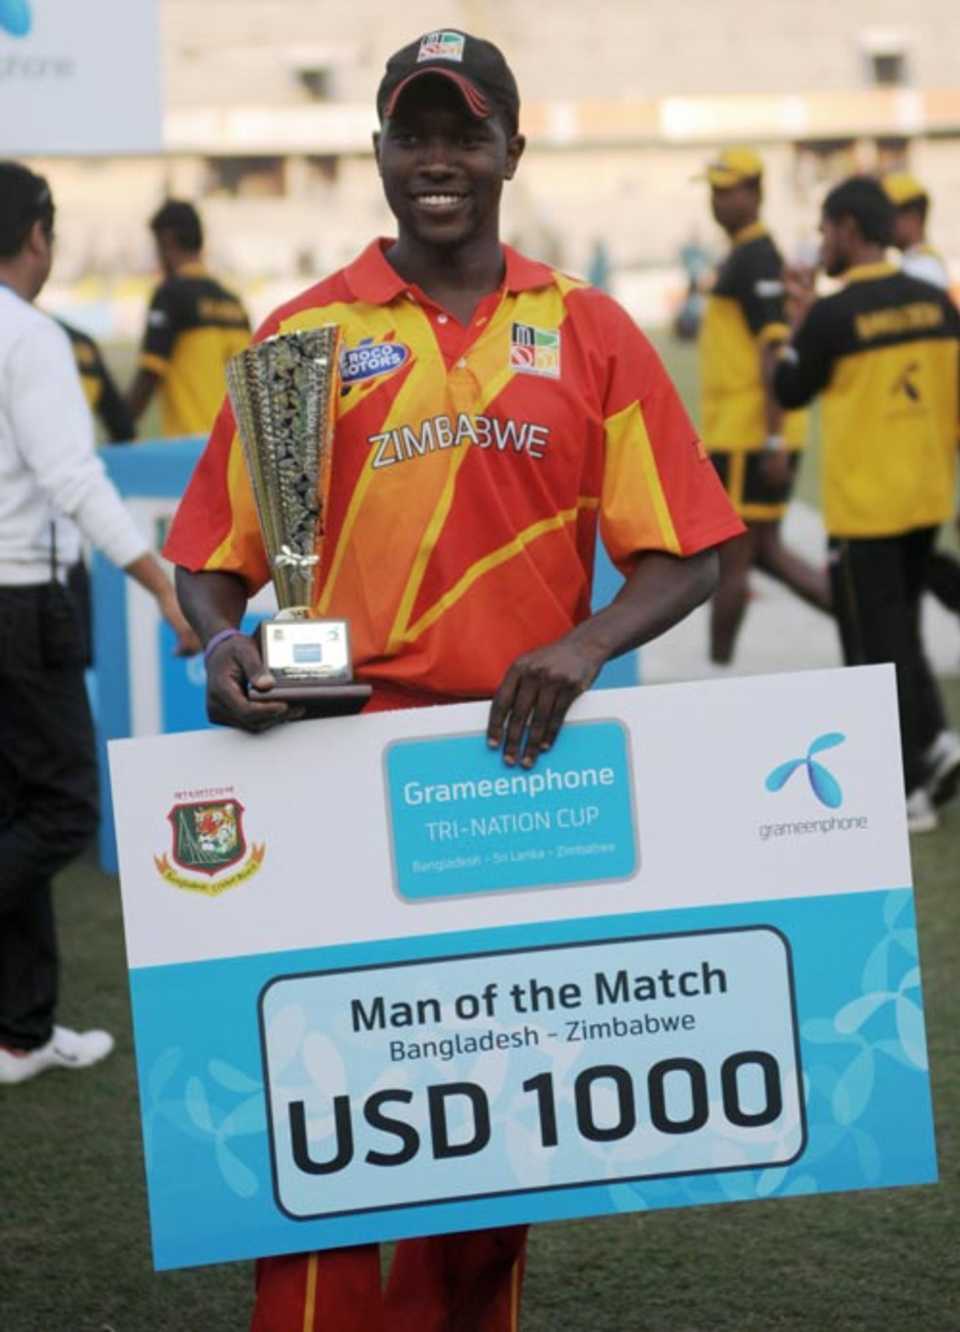 Elton Chigumbura was named the Man of the Match